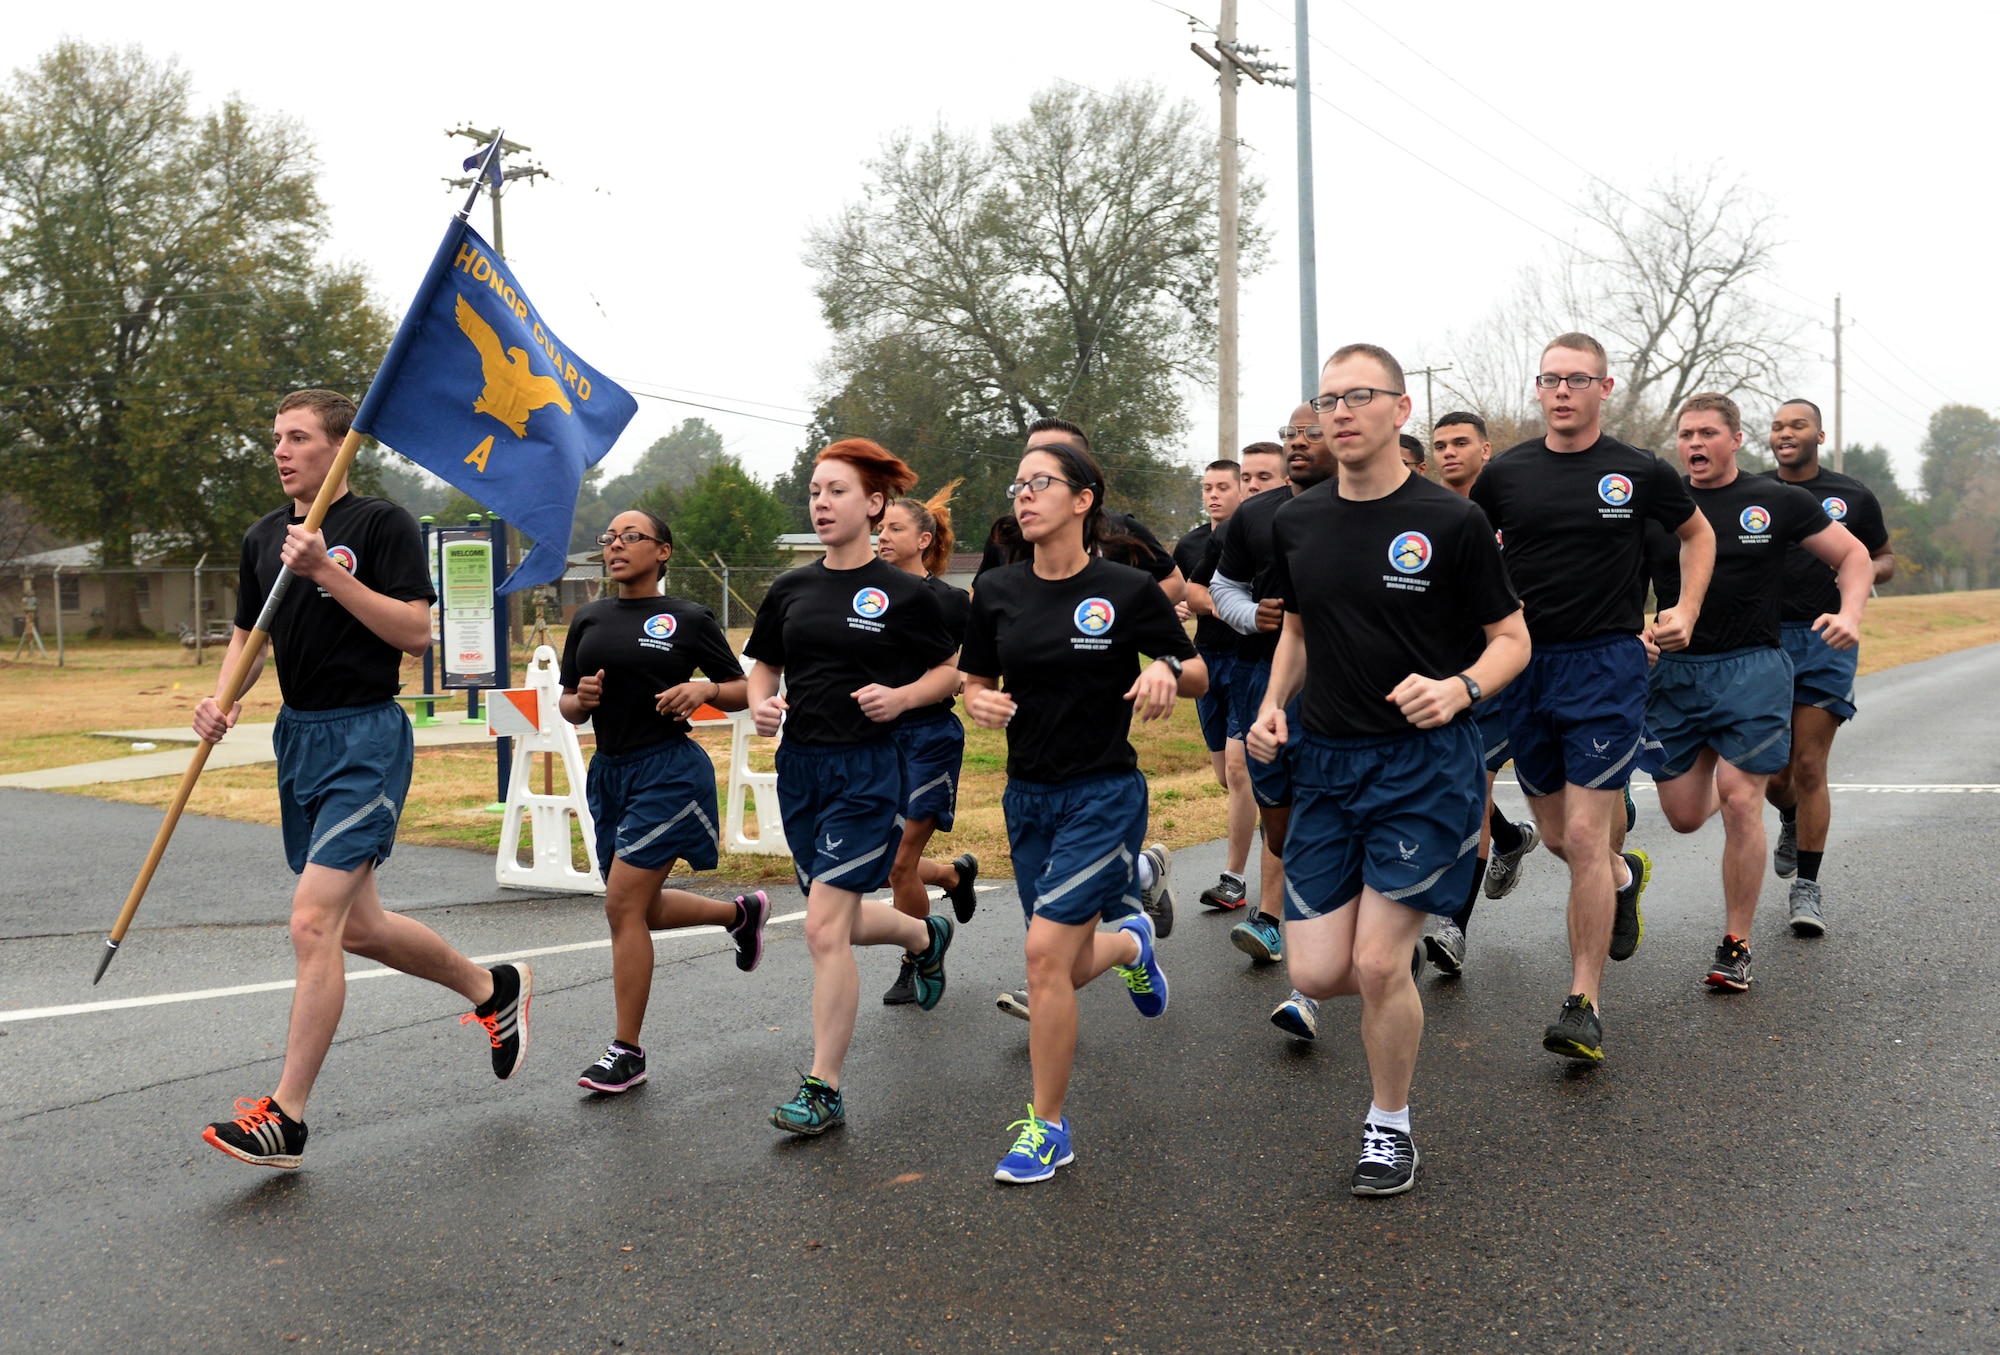 Barksdale Honor Guard members run in formation in the first SrA Bryan R. Bell 5K Memorial Run on Barksdale Air Force Base, La., Dec. 5, 2014. The run honored Bell, who gave his life defending his country in Afghanistan in 2012 in support of Operation Enduring Freedom. (U.S. Air Force photo/Airman 1st Class Curt Beach)